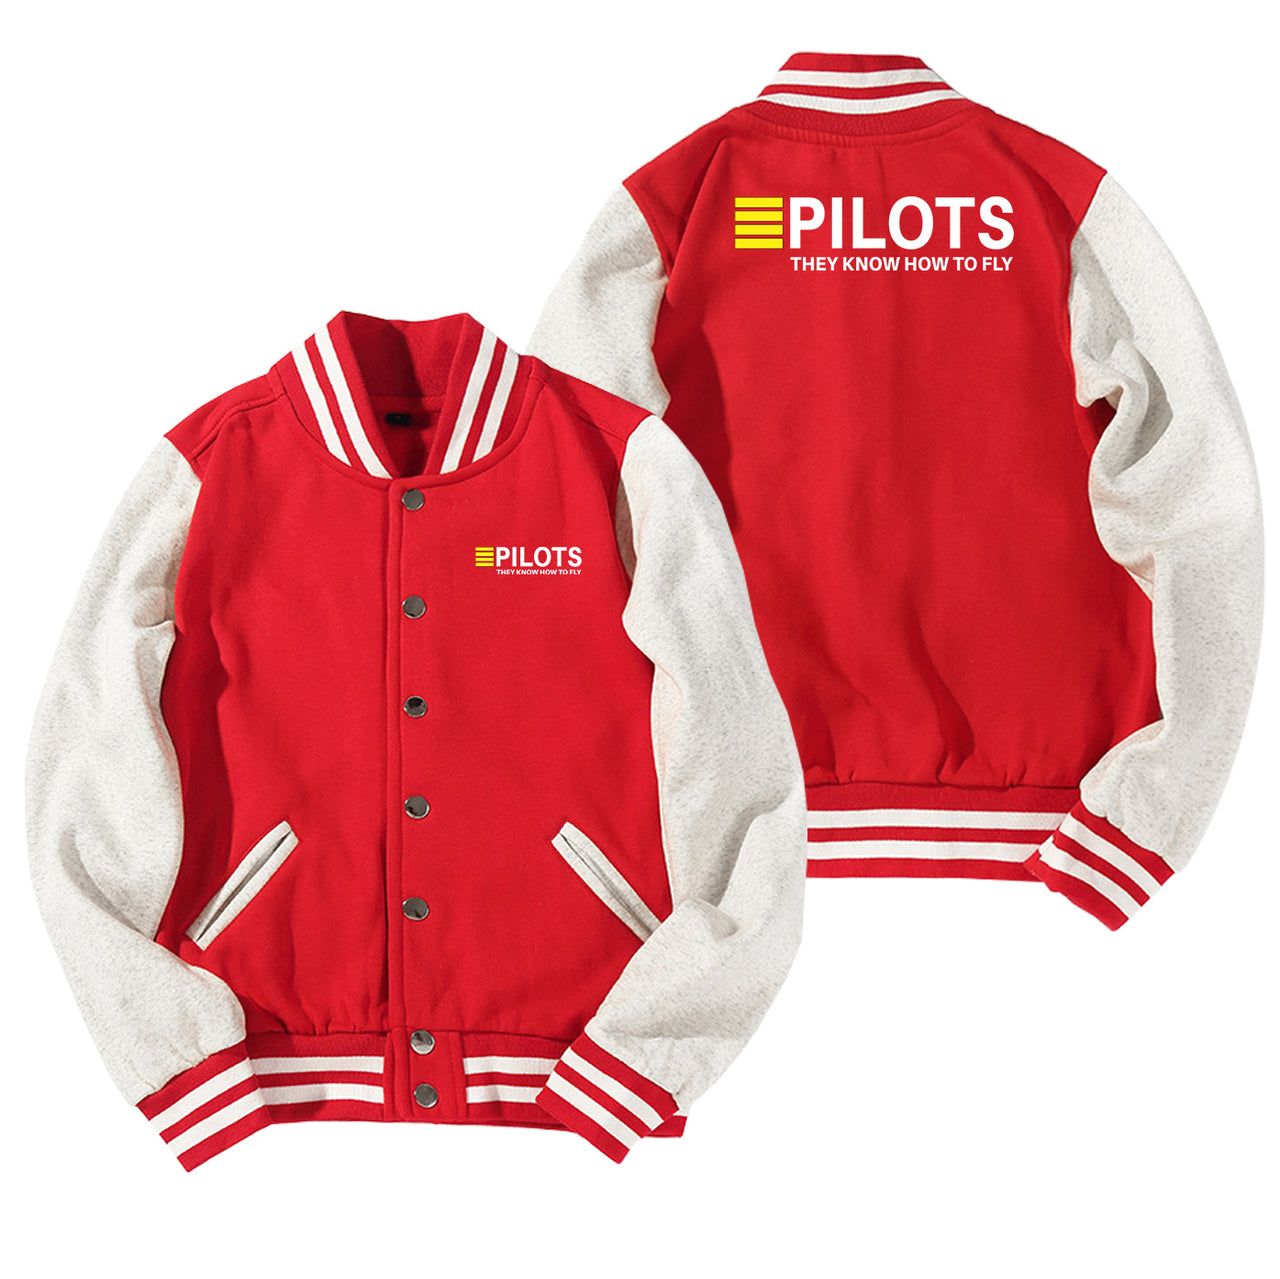 Pilots They Know How To Fly Designed Baseball Style Jackets